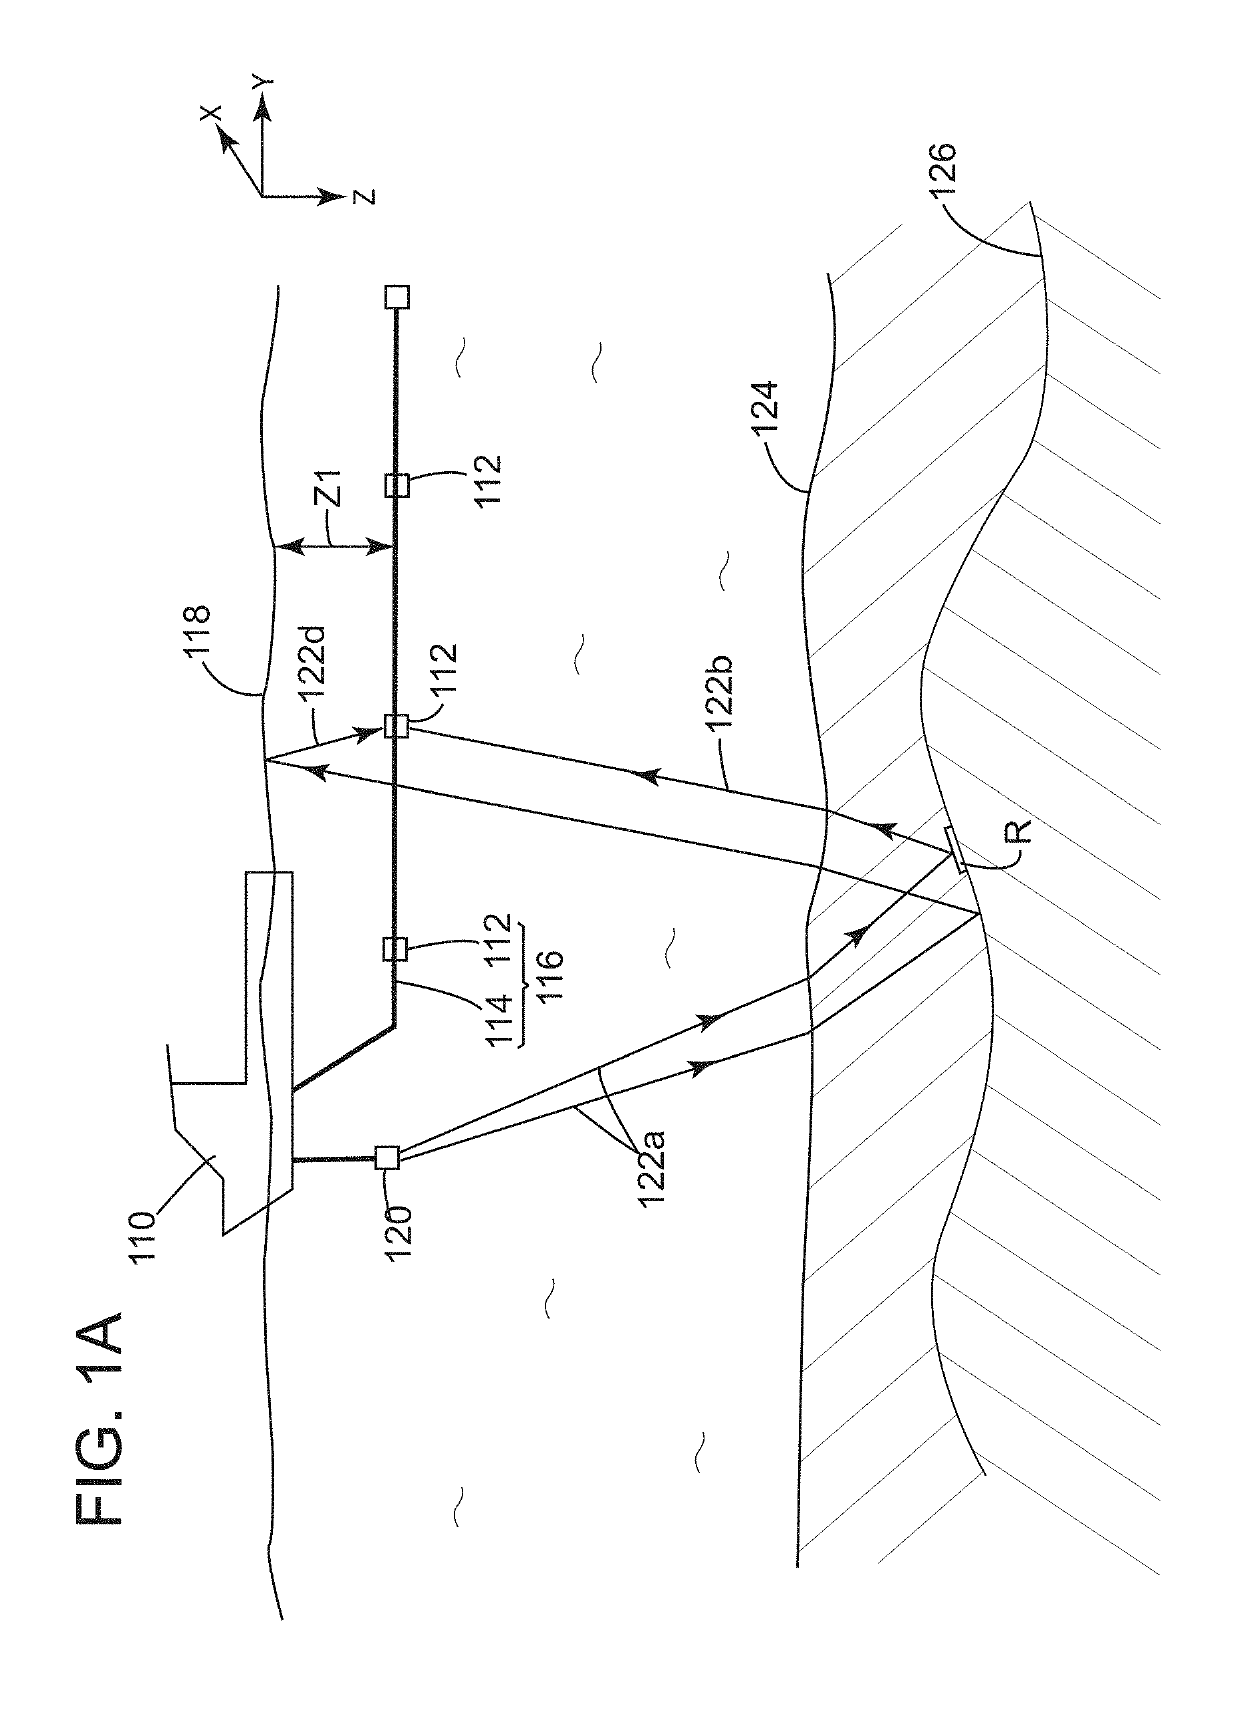 Method and apparatus for analyzing fractures using AVOAz inversion